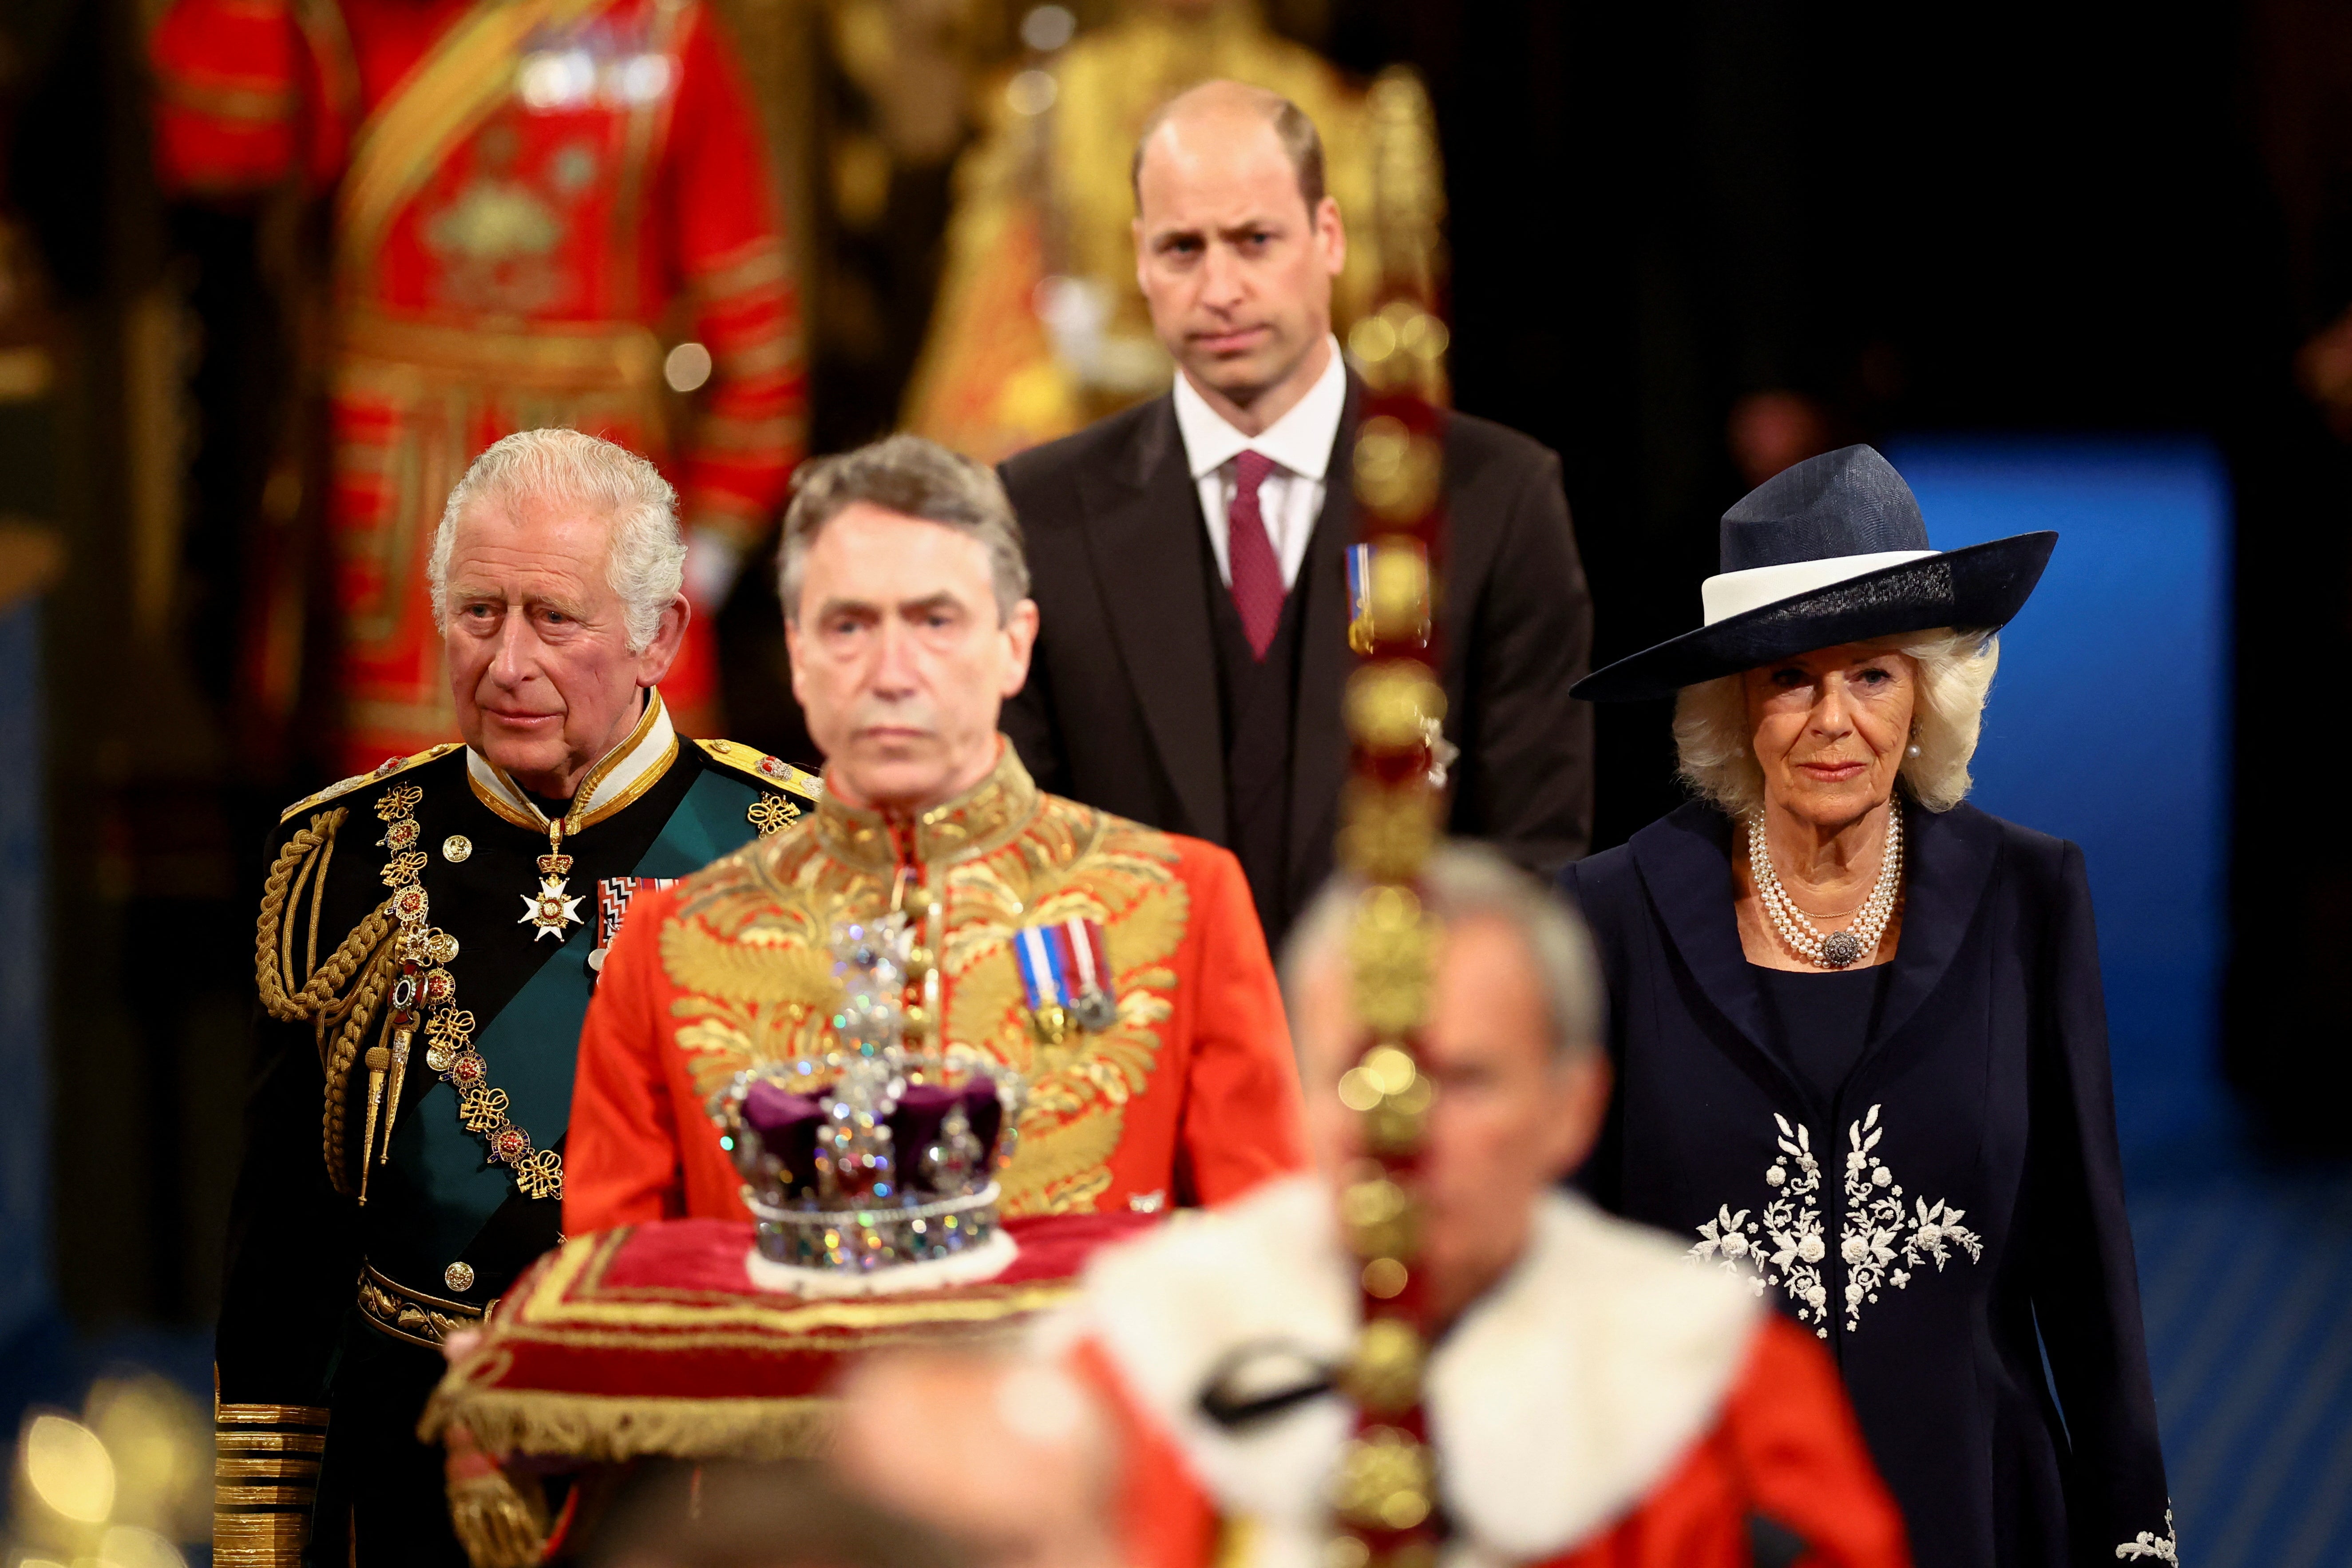 The Prince of Wales and the Duchess of Cornwall, with the Duke of Cambridge, back centre, proceed behind the Imperial State Crown through the Royal Gallery during the State Opening of Parliament (Hannah McKay/PA)